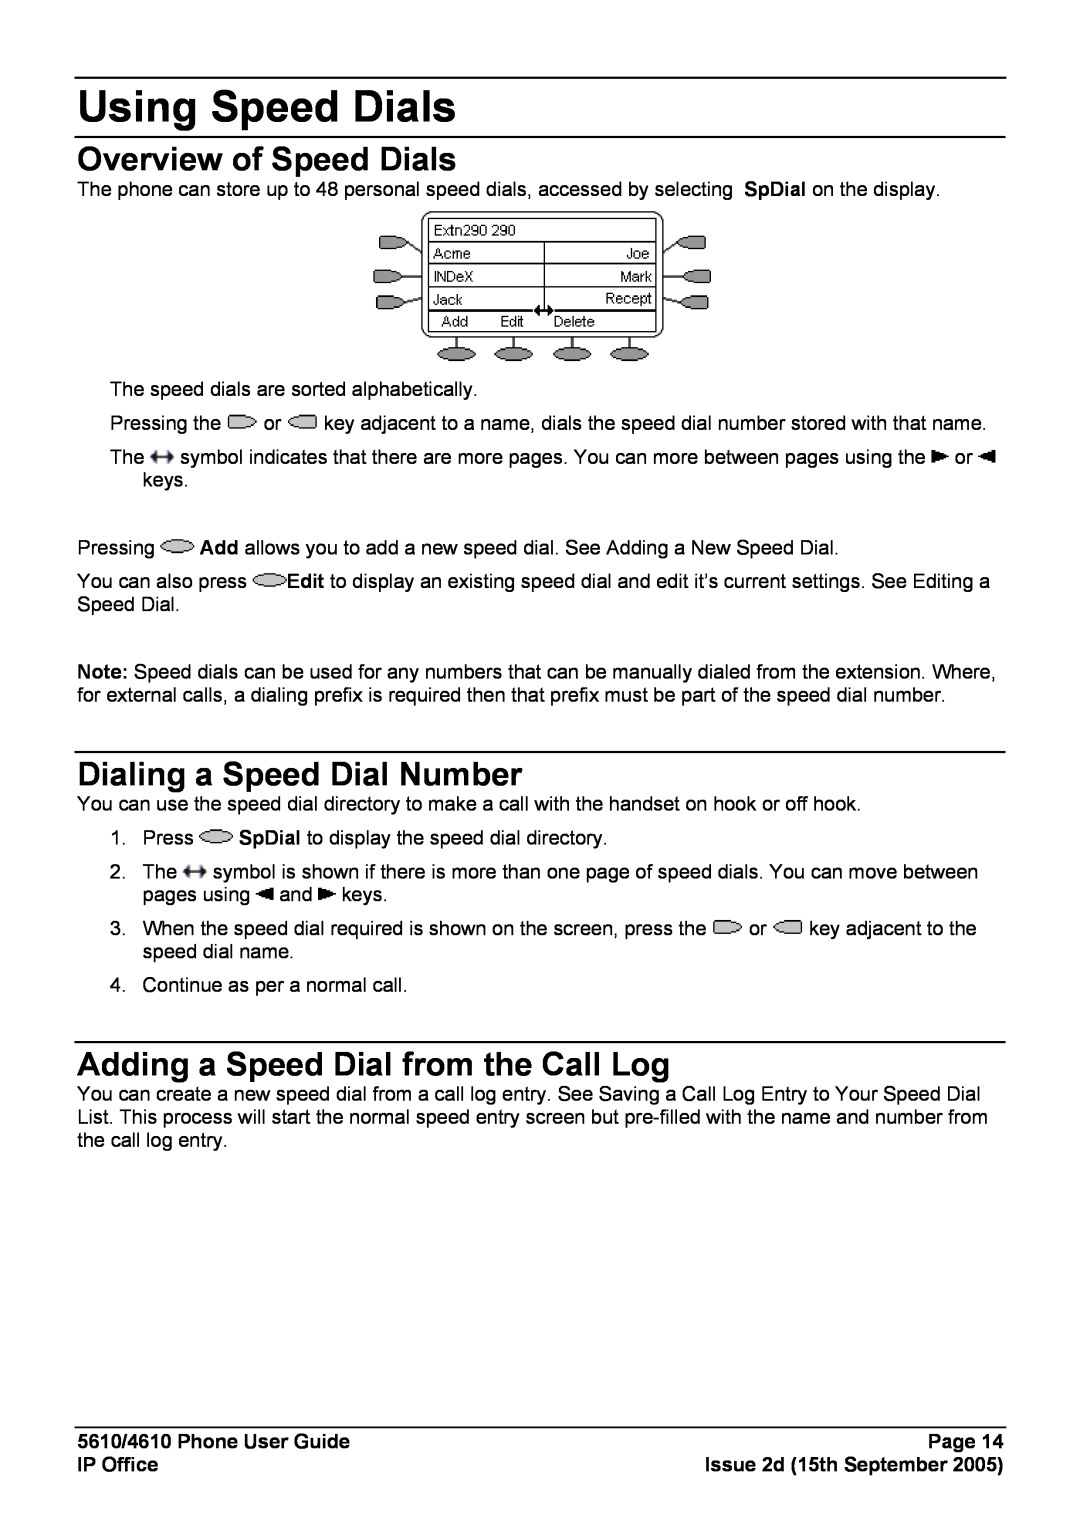 Avaya 4610 Using Speed Dials, Overview of Speed Dials, Dialing a Speed Dial Number, Adding a Speed Dial from the Call Log 